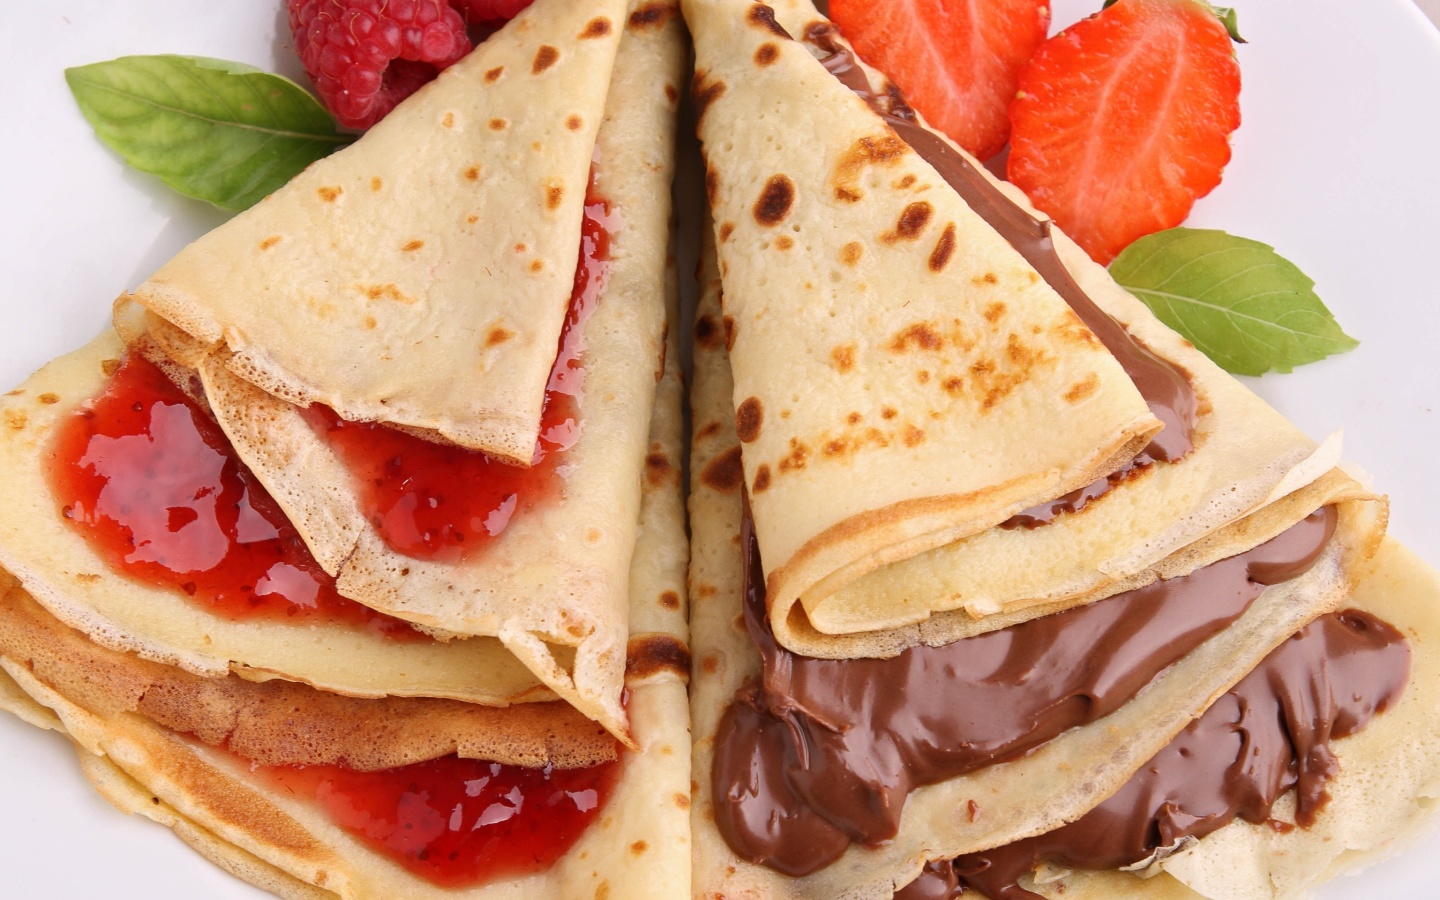 Most delicious pancakes with jam screenshot #1 1440x900